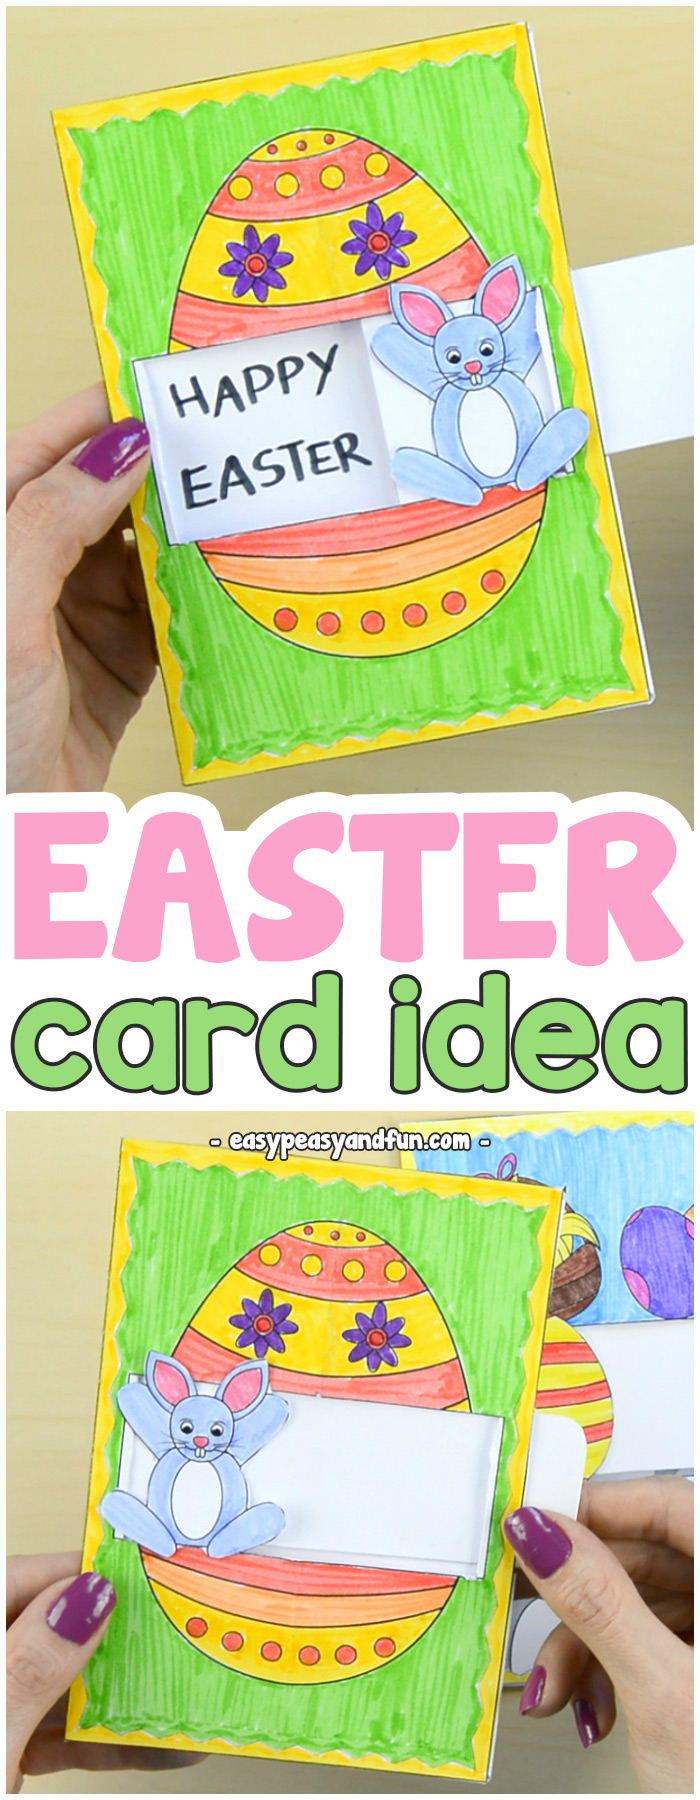 Hidden Message Easter Card Idea for Kids to Make #Eastercraftsforkids #papercraftsforkids #DIYcardideas